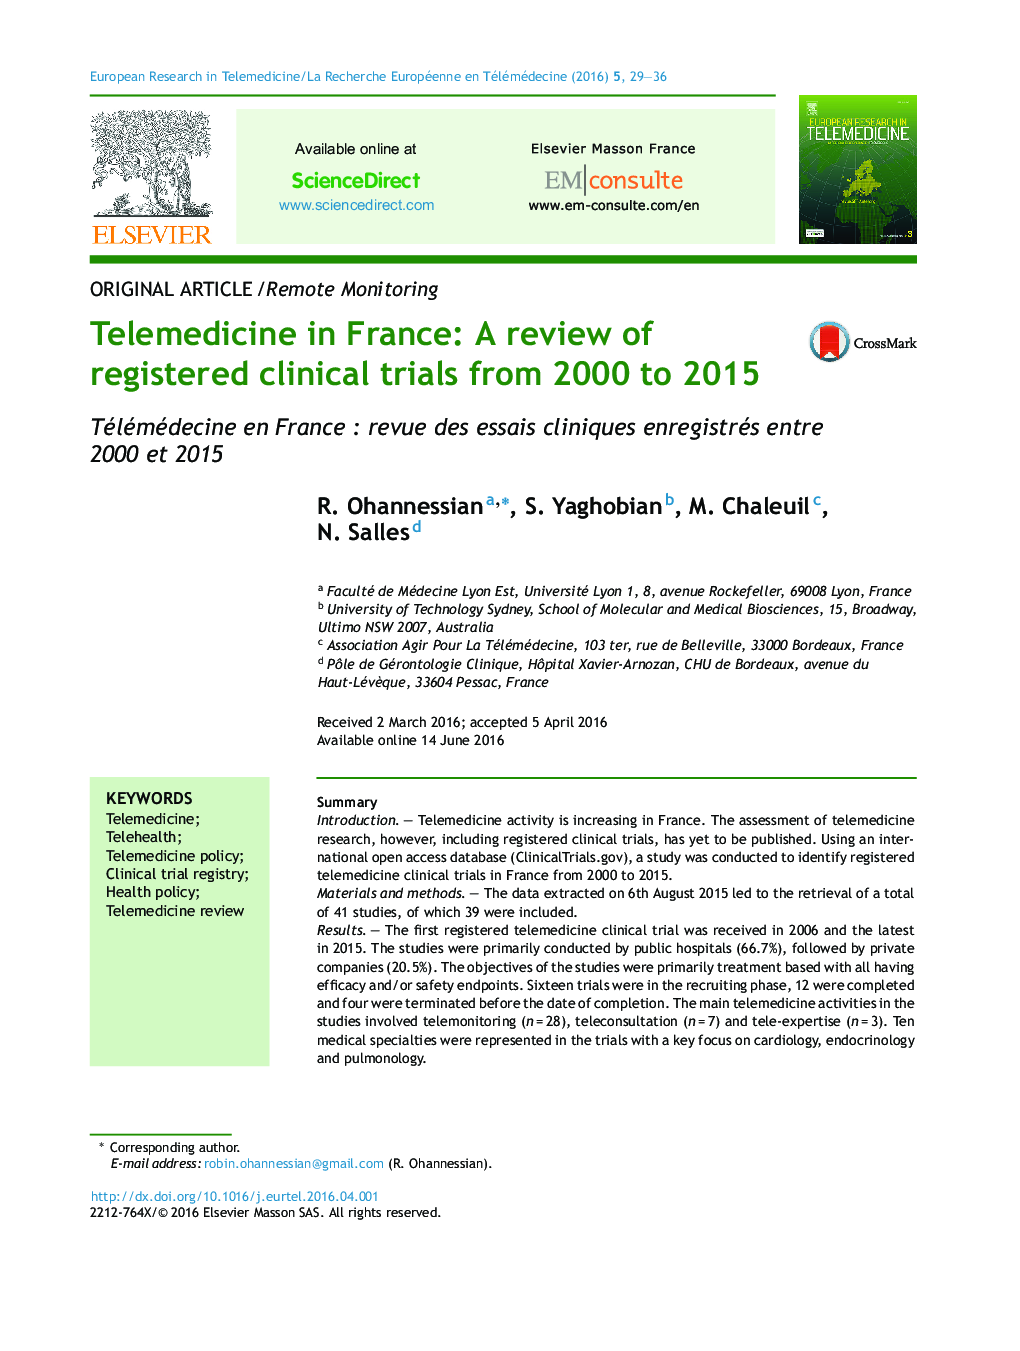 Telemedicine in France: A review of registered clinical trials from 2000 to 2015